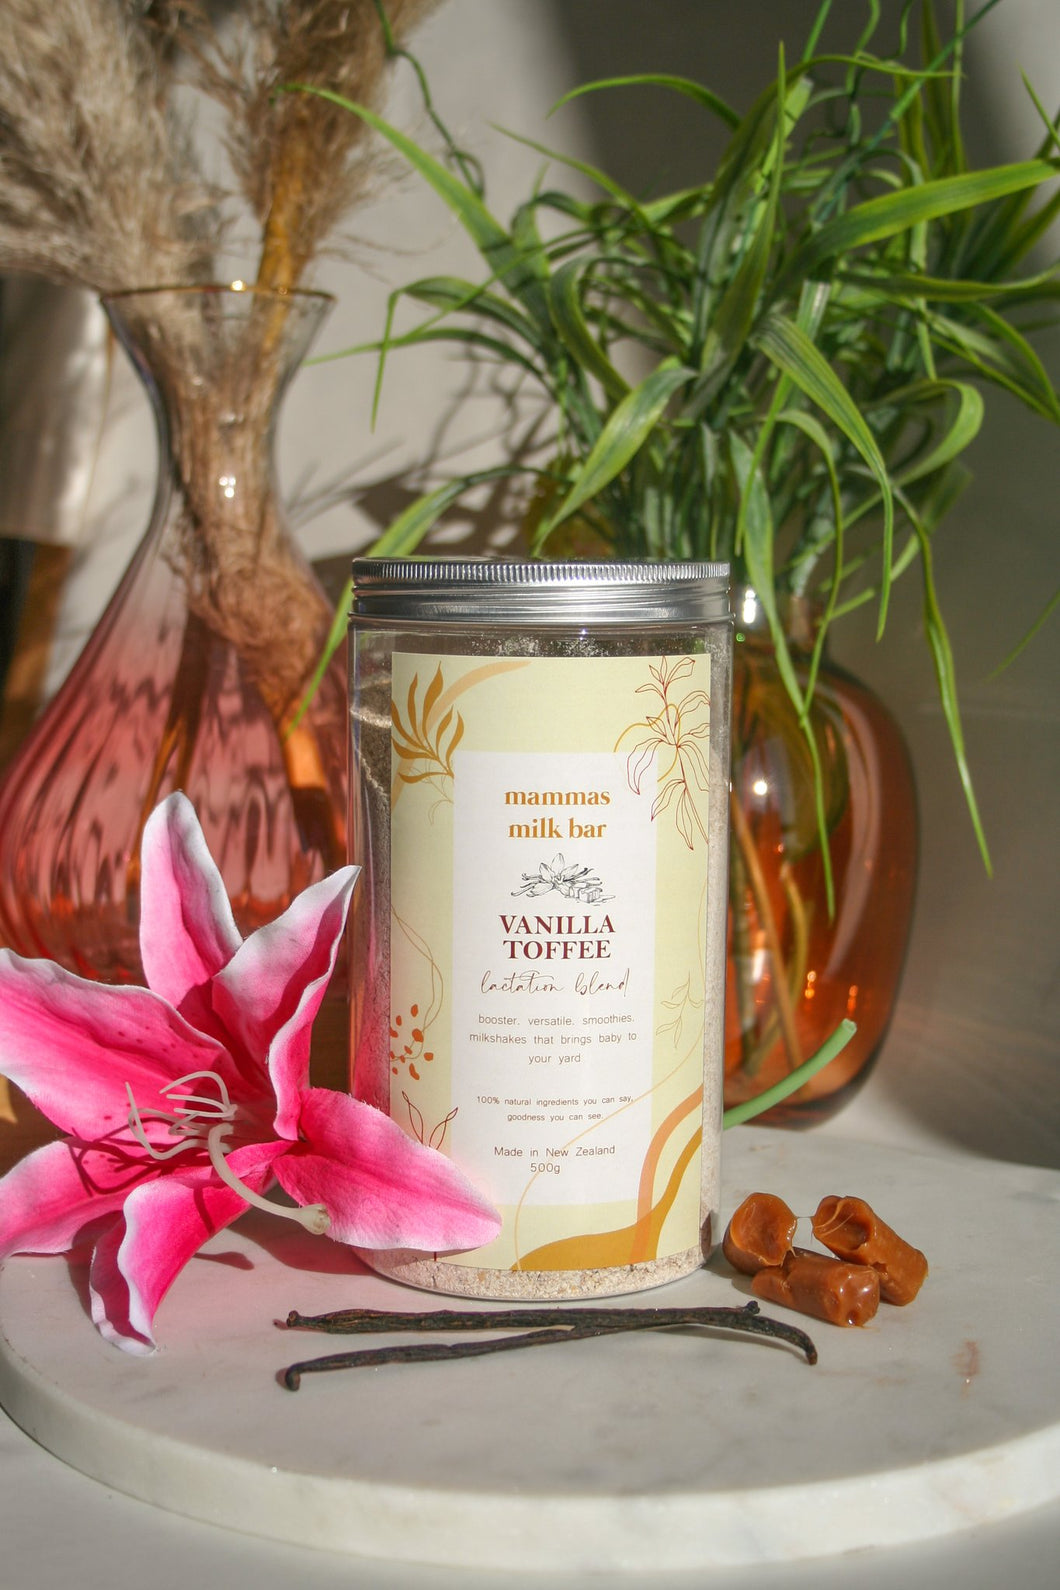 pink lilly, vanilla beans, toffee in from of a large jar of powder, plants in vases behind 